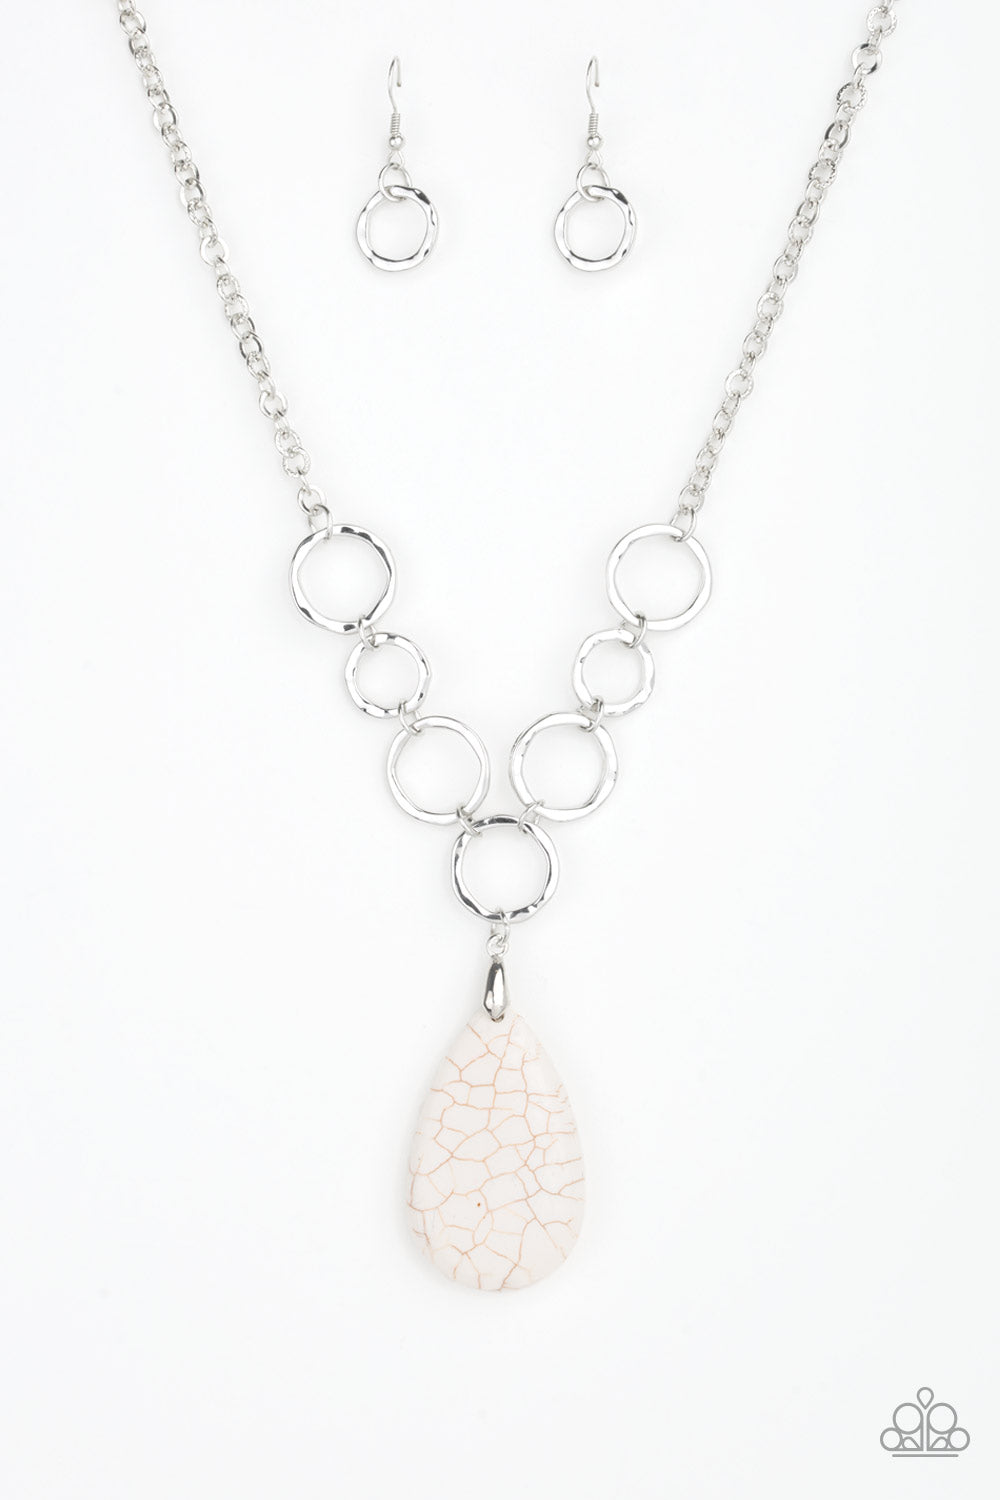 LIVIN ON A PRAIRIE - WHITE CRACKLE STONE TEARDROP NECKLACE